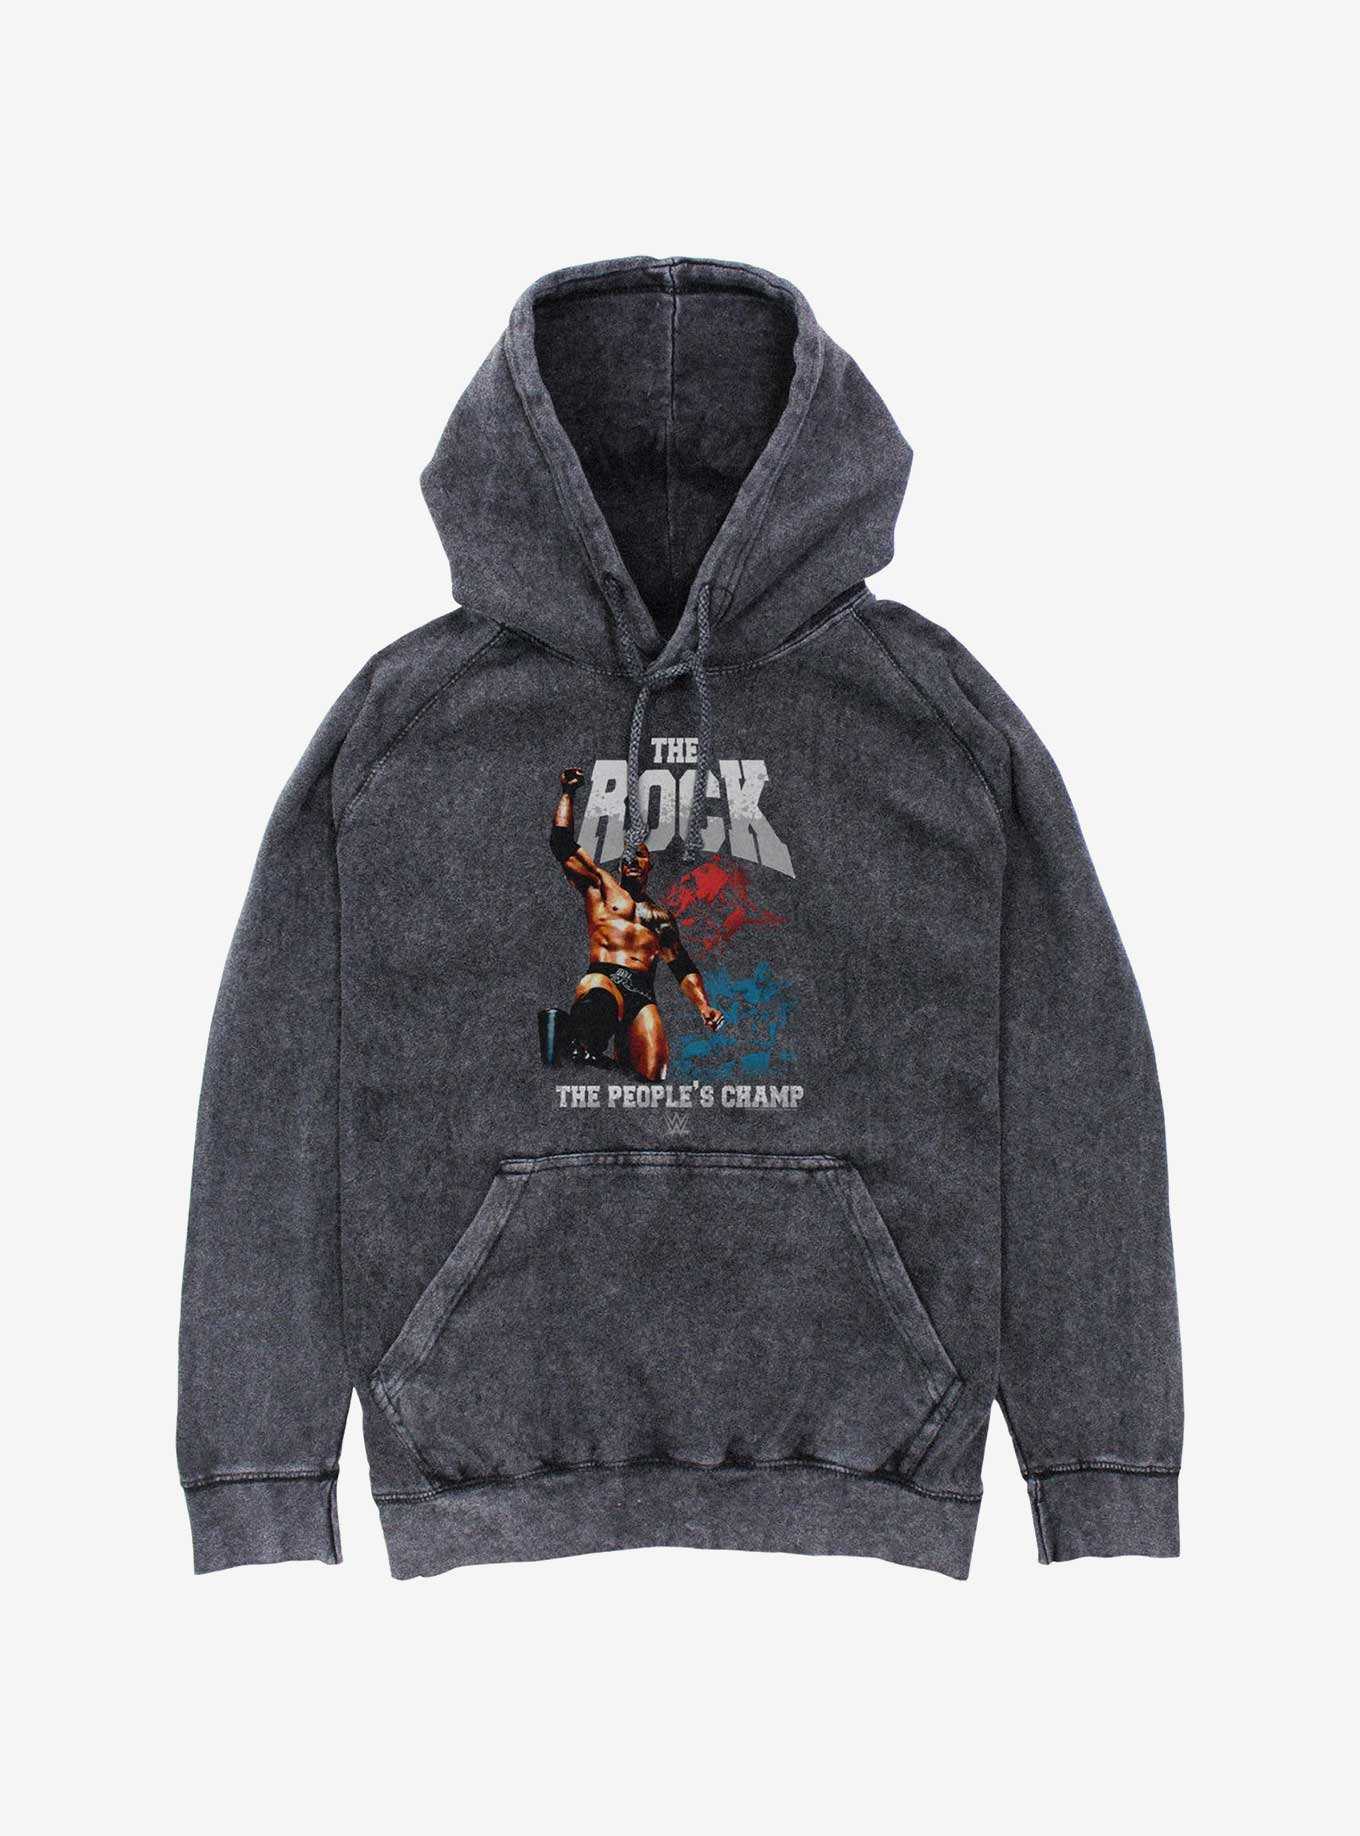 WWE The Rock The People's Champ Mineral Wash Hoodie, , hi-res